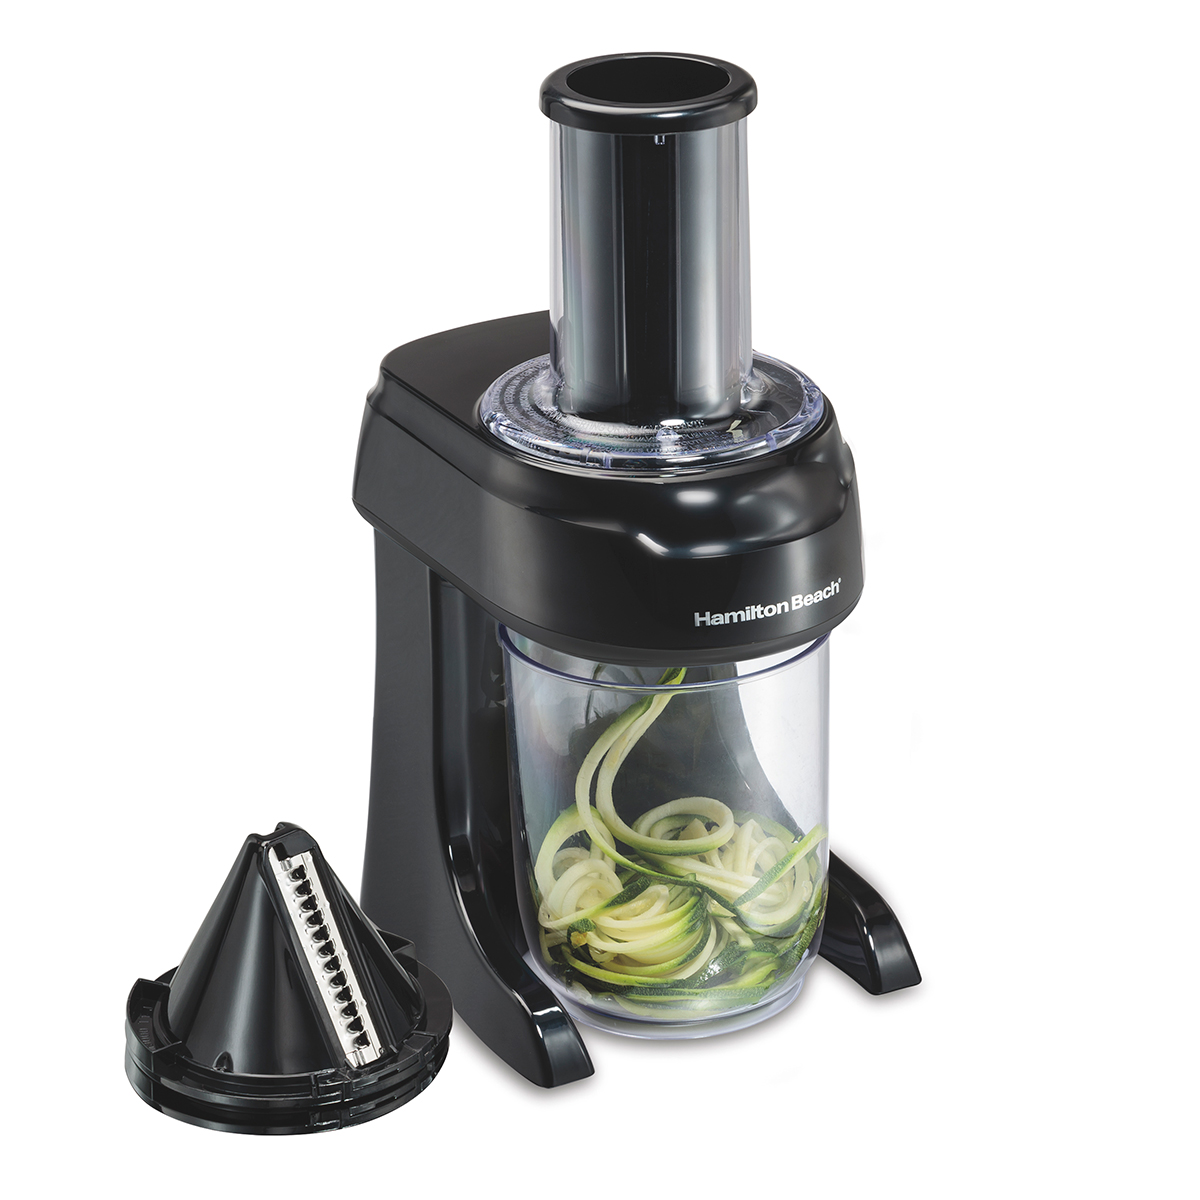 Purchase 3-in-1 Electric Spiralizer now